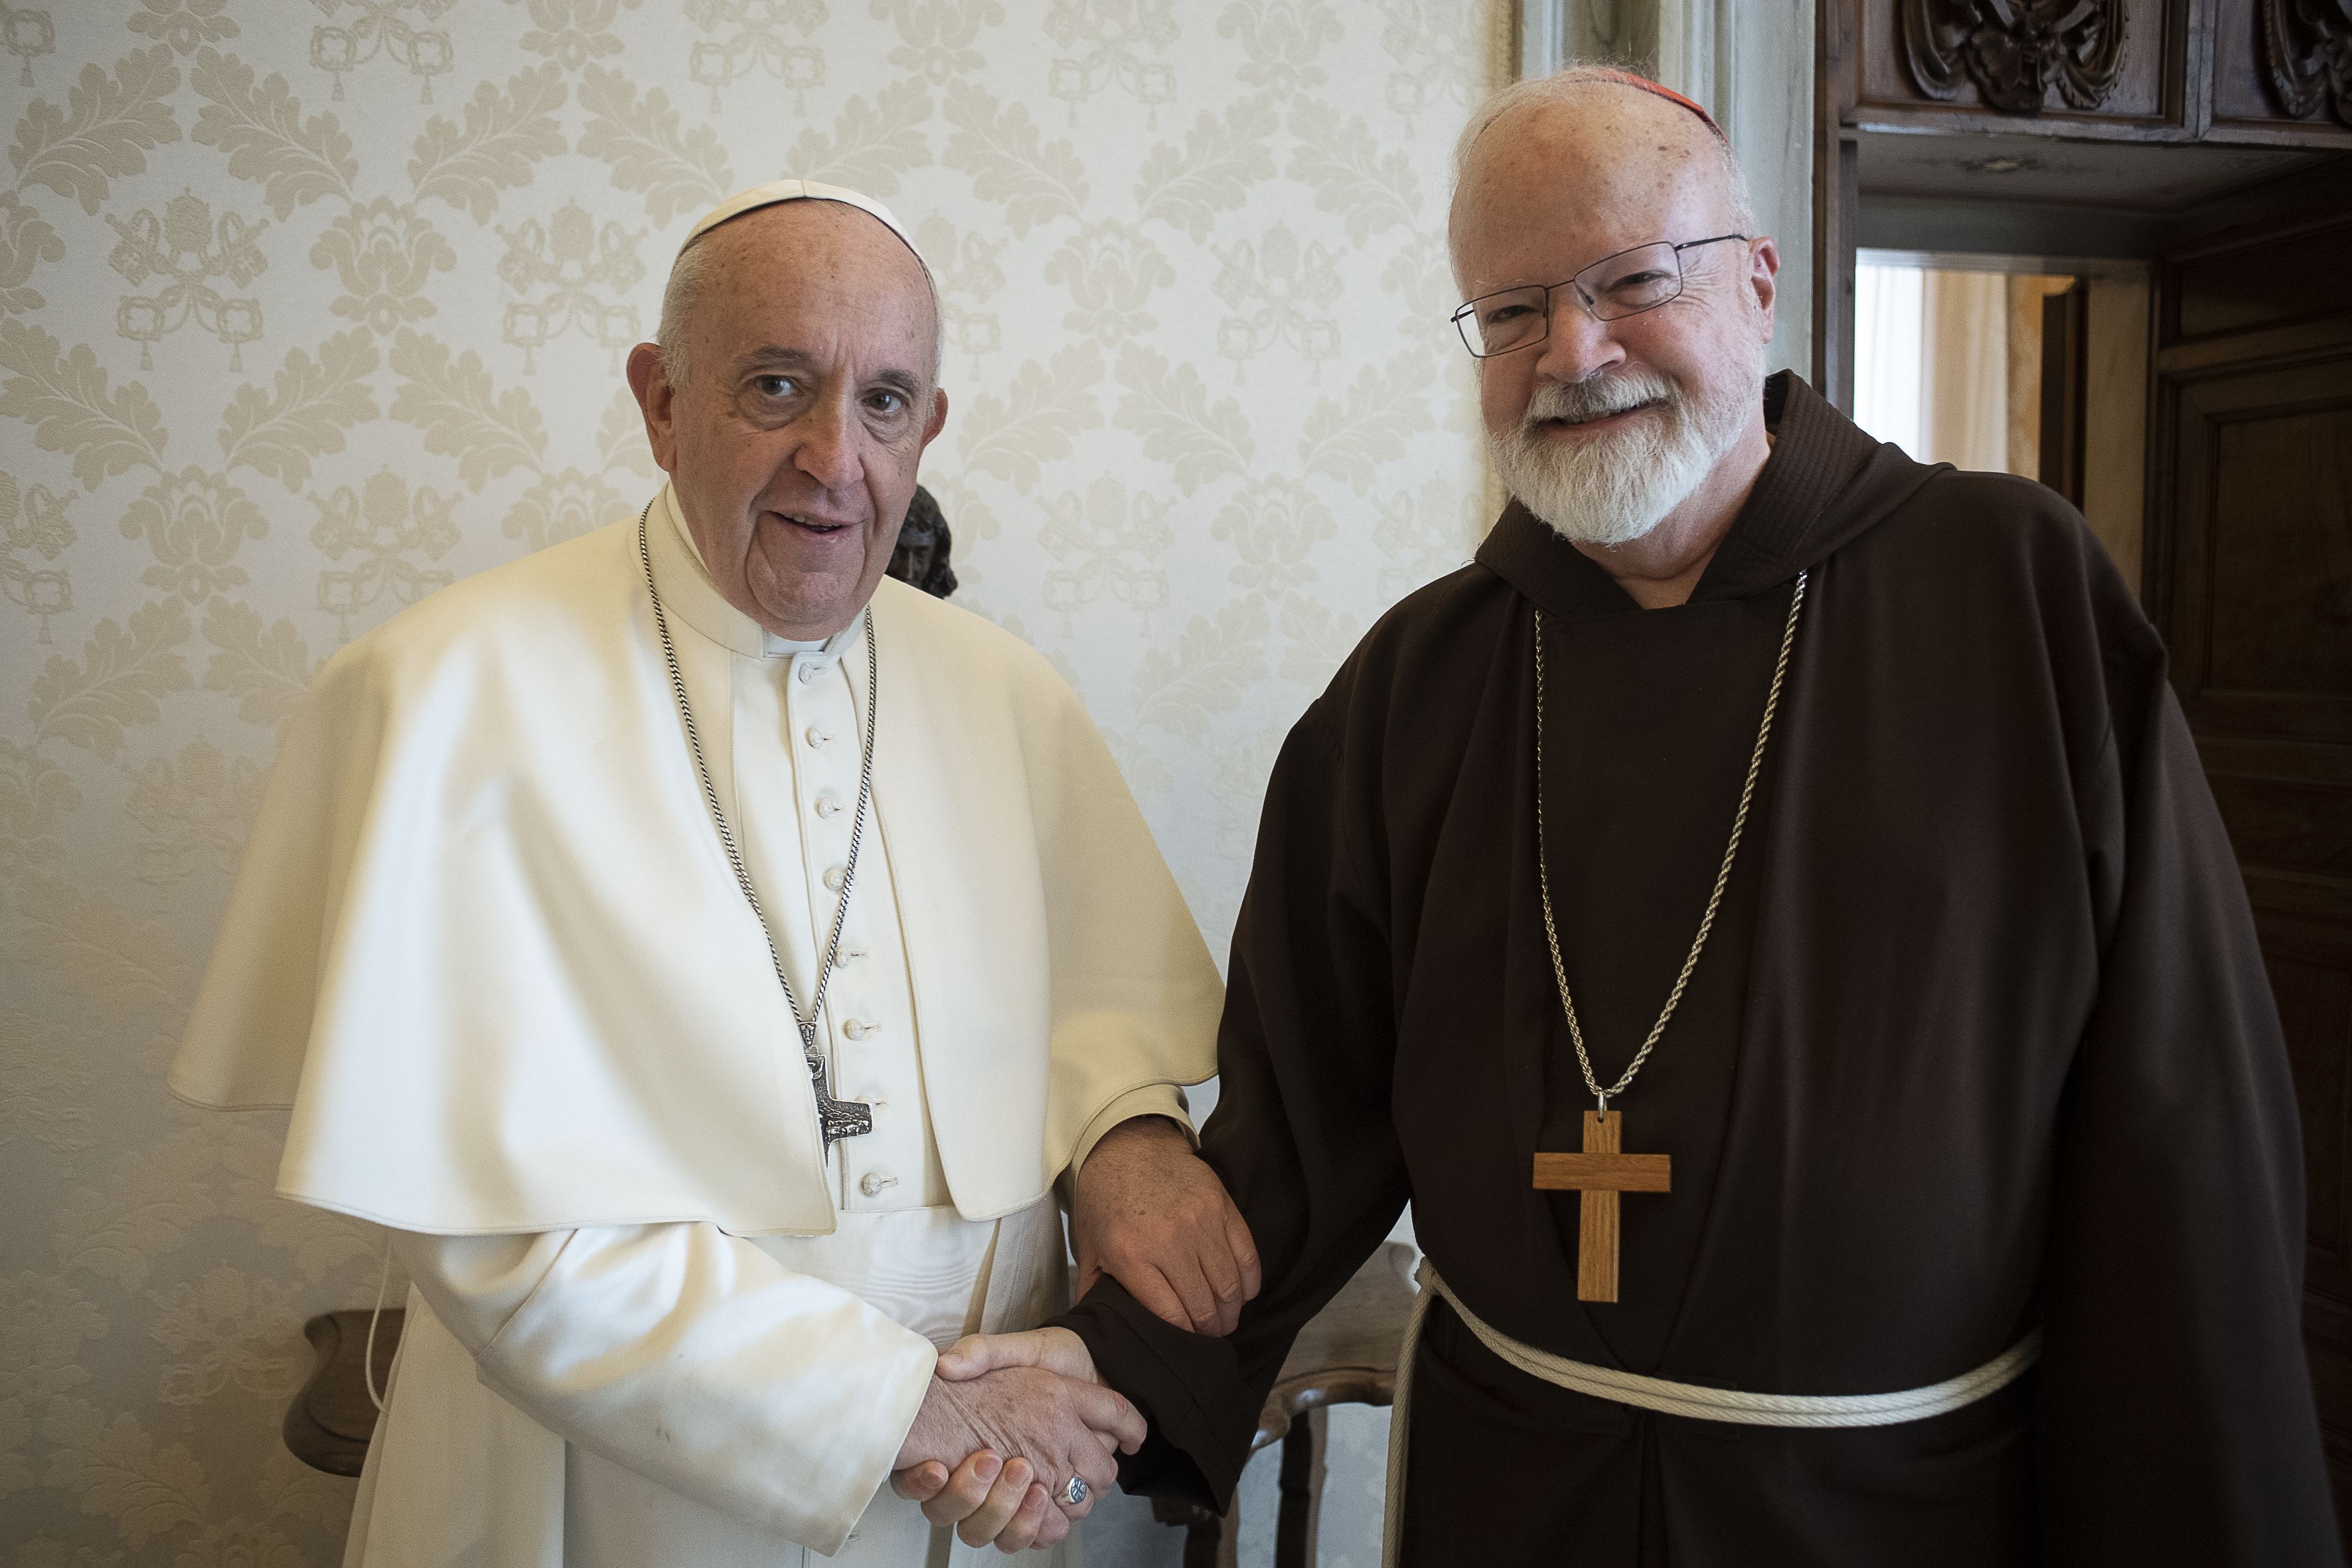 Pope Francis poses for a photo with Cardinal Sean P. O'Malley of Boston, president of the Pontifical Commission for the Protection of Minors, during a private audience at the Vatican April 4, 2019. Cardinal O'Malley was at the Vatican for meetings of the commission and also the Council of Cardinals, a group that advises Pope Francis. (CNS photo/Vatican Media) See POPE-OMALLEY-COMMISSION April 8, 2019.